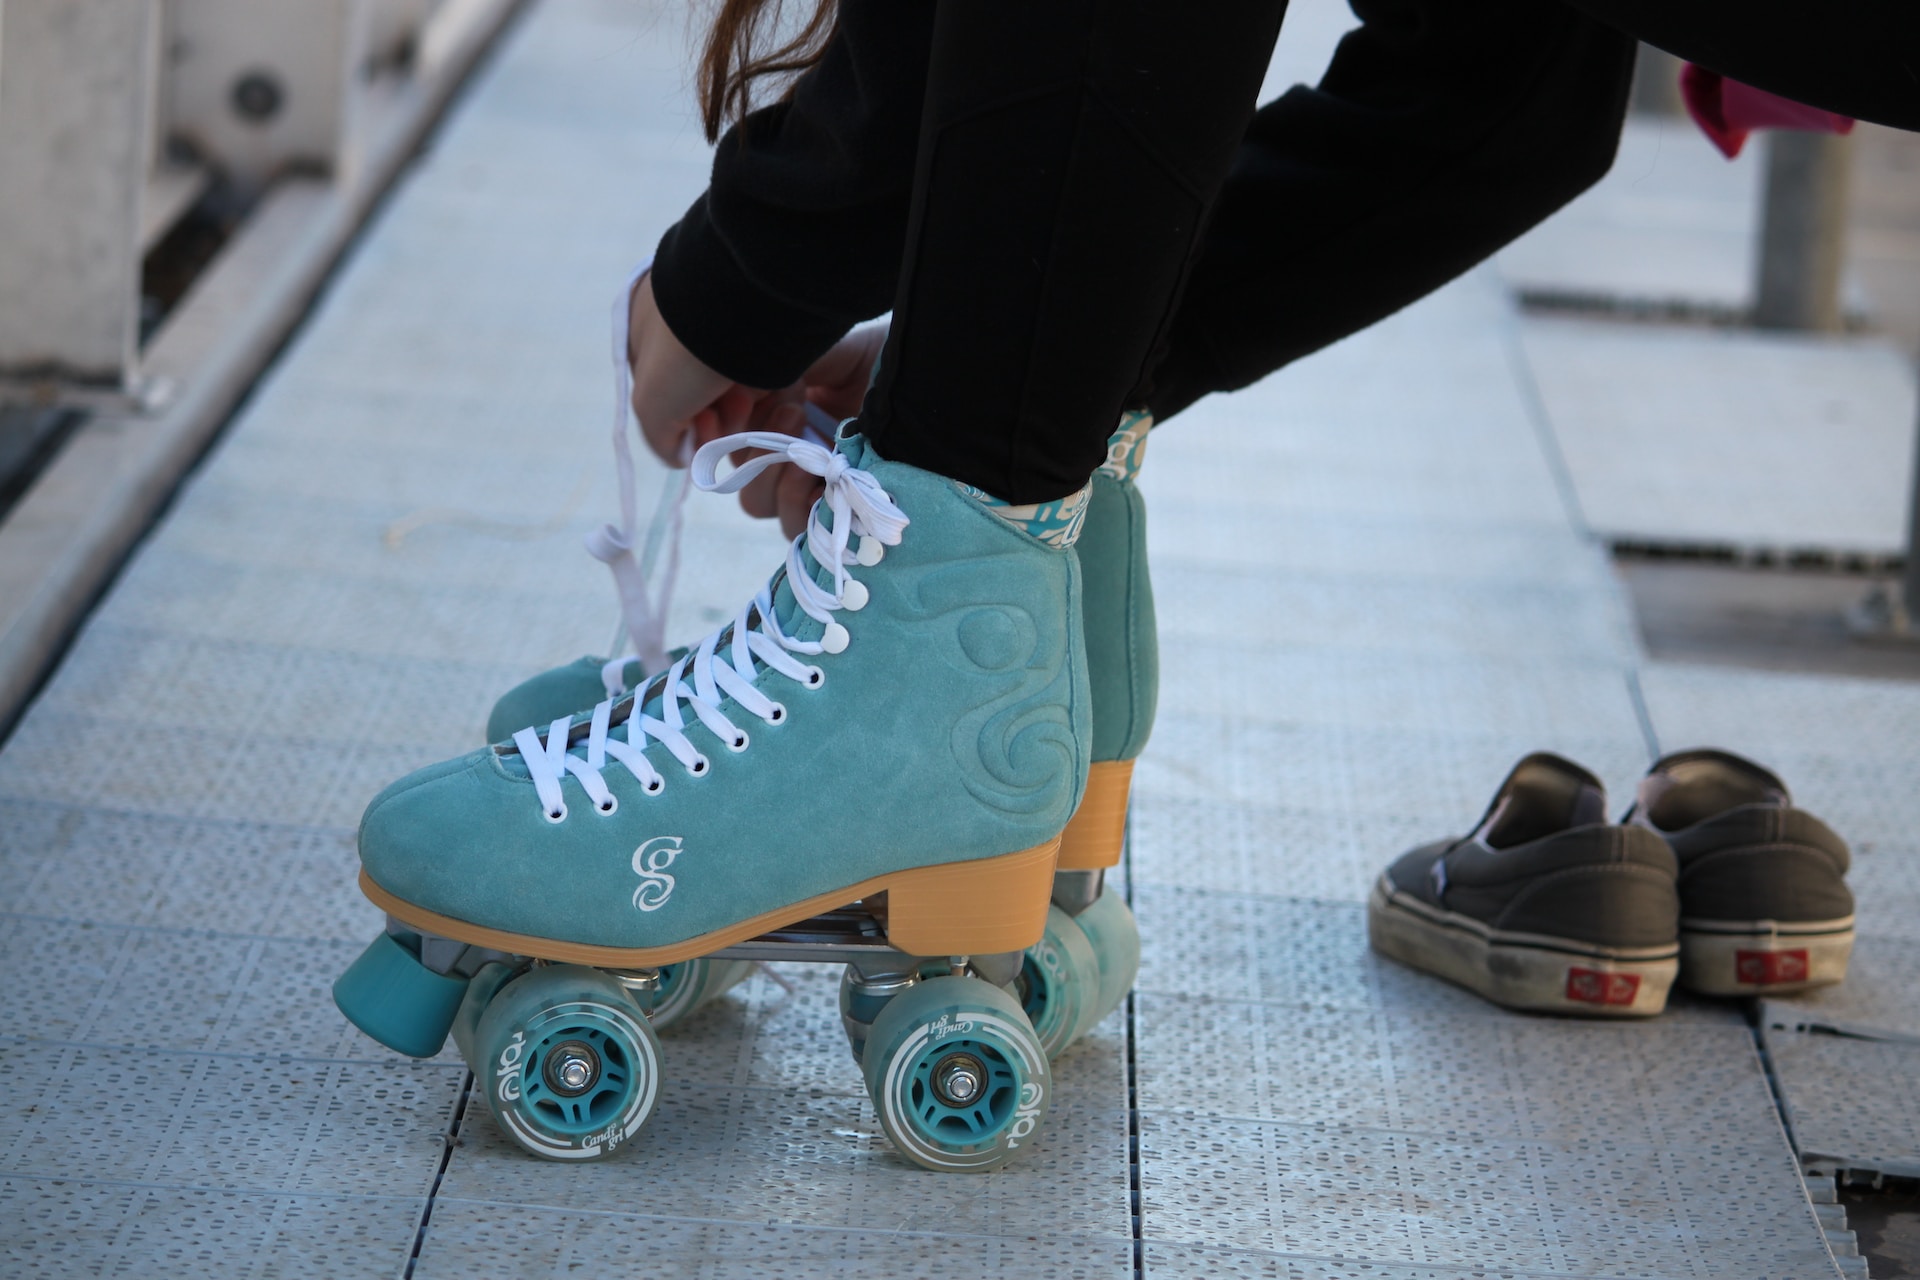 A person putting on skates before going rollerblading.